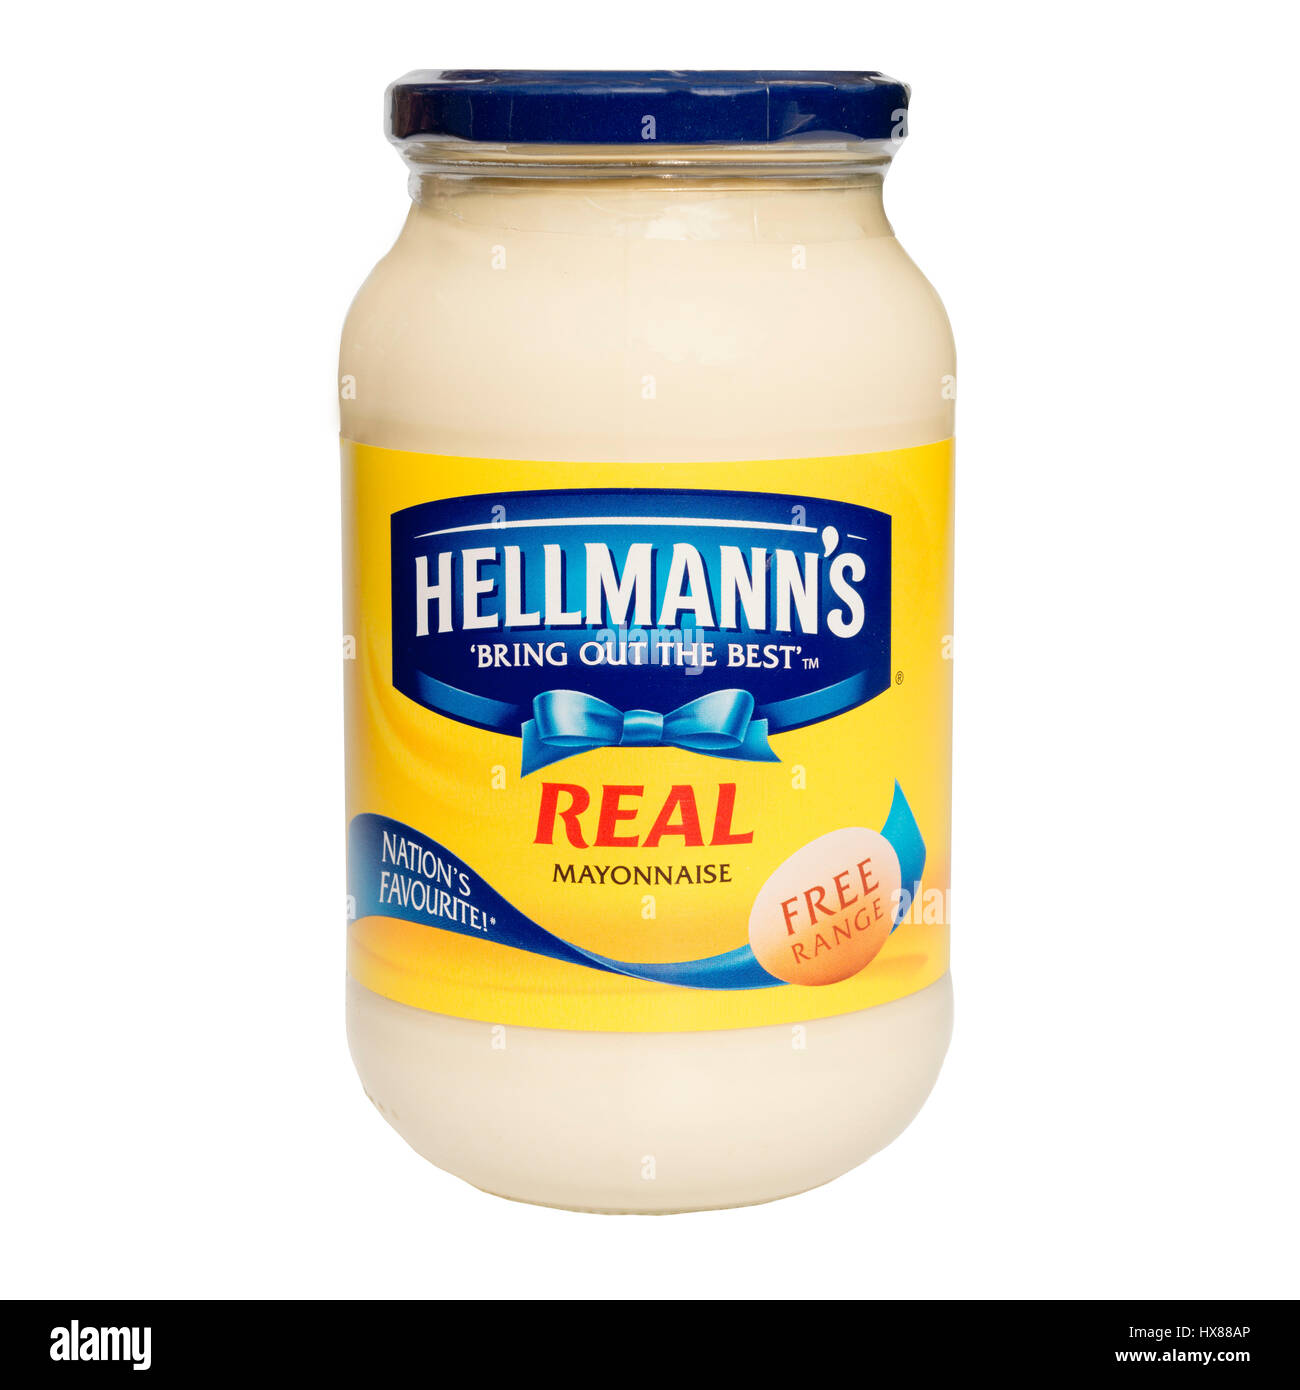 Hellmanns Mayonnaise jar cut out or isolated against a white background. Stock Photo